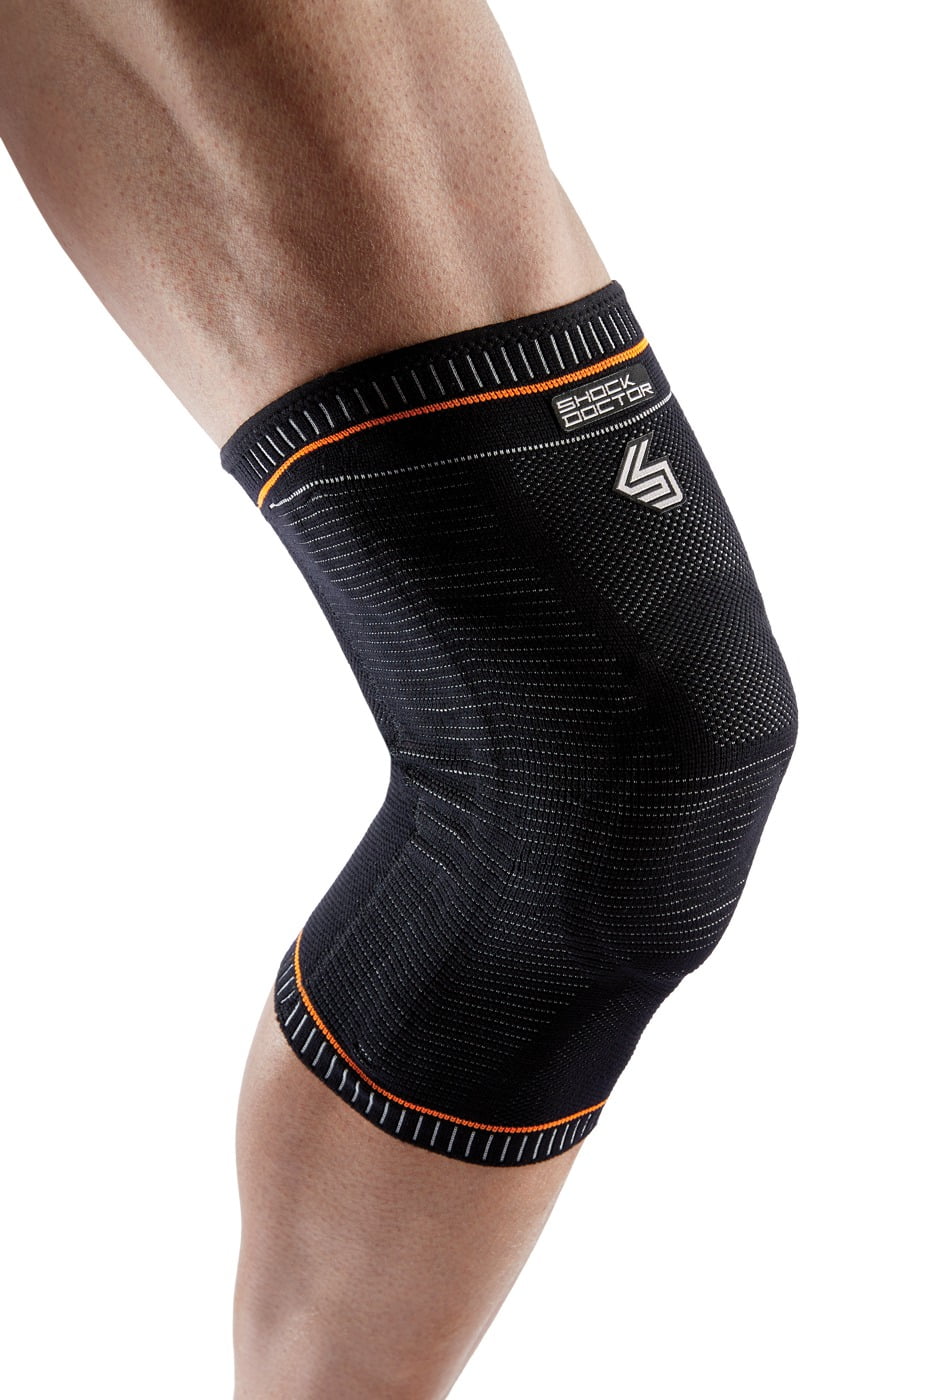 Shock Doctor Adult Knee Compression Sleeve 864,Knee Support,Alignment,Healing 